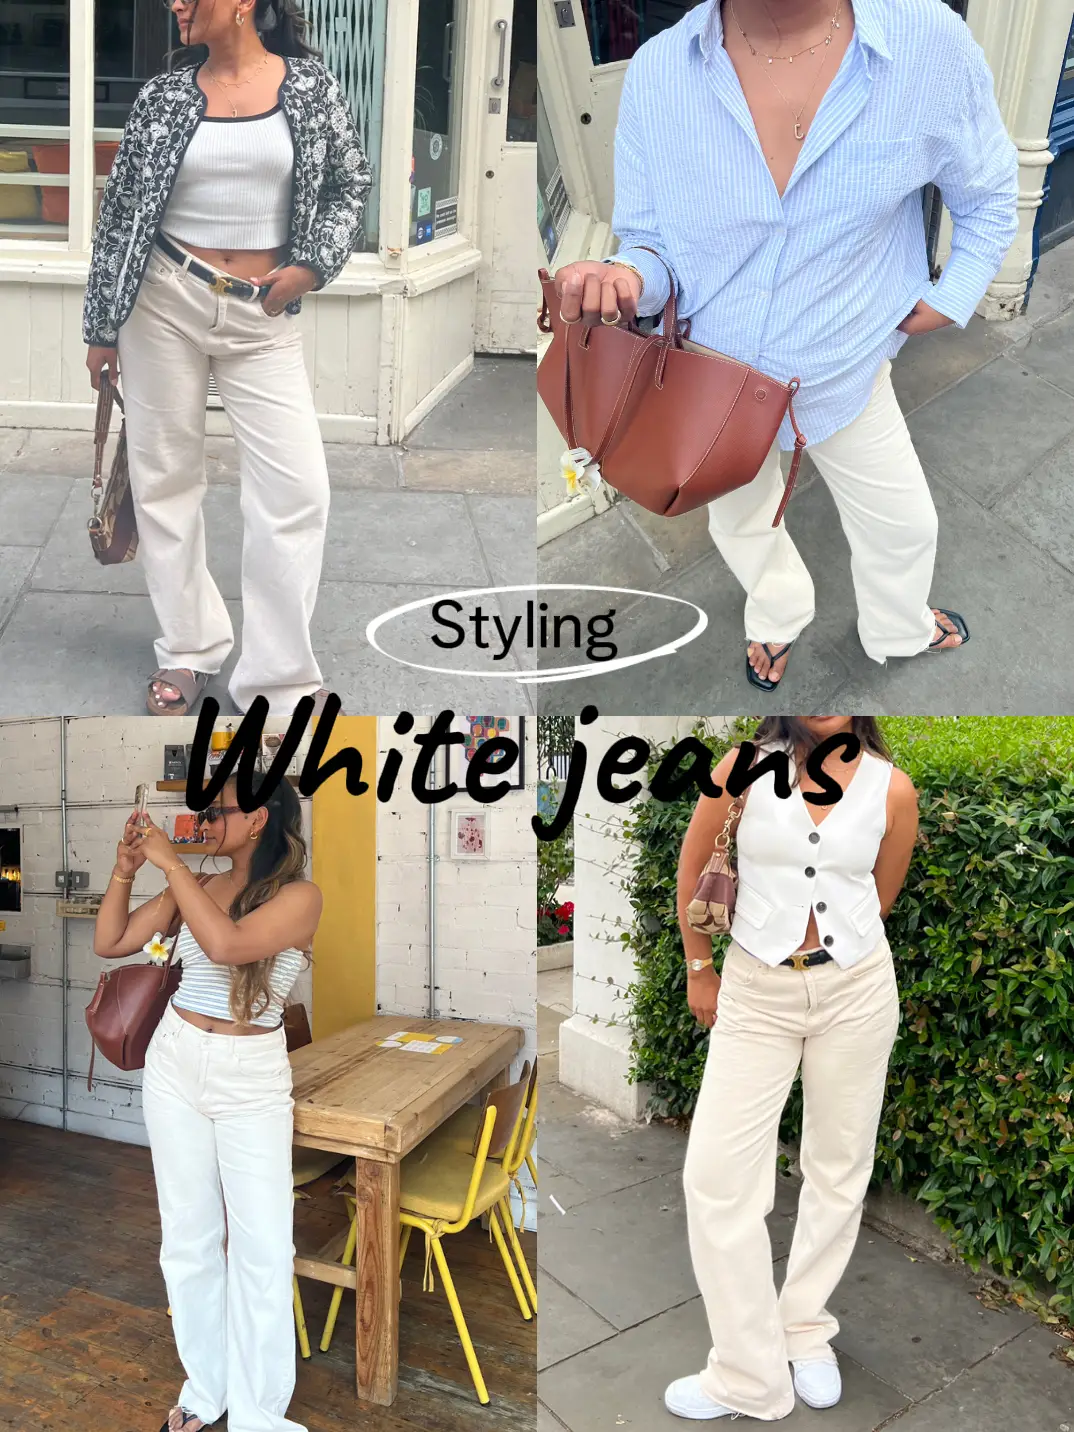 4 Ways To Style White Jeans For Spring/Summer 👖